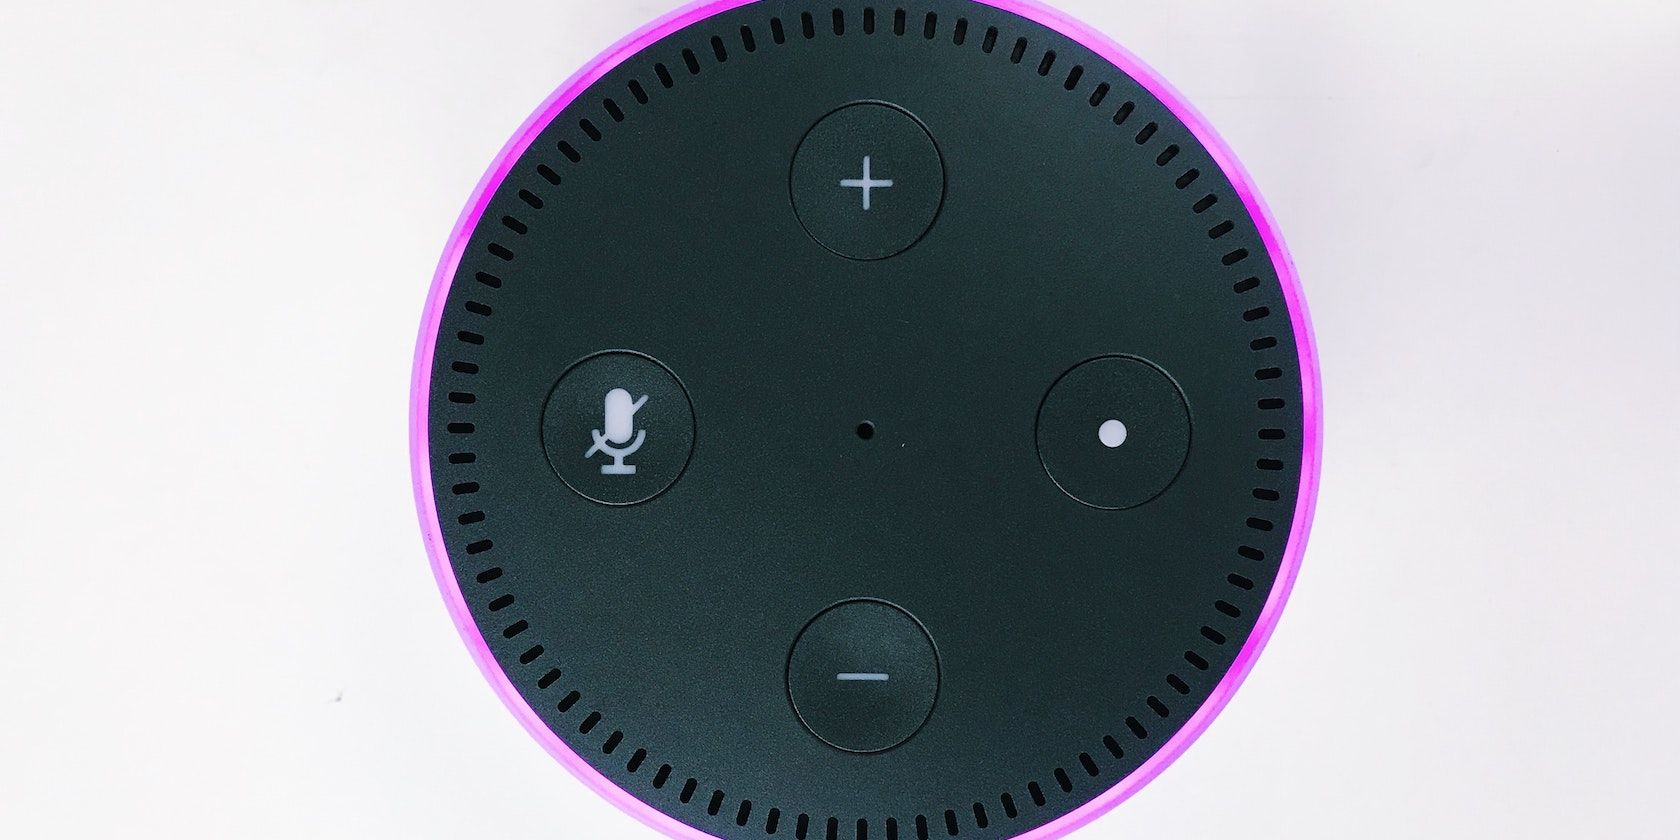 Privacy settings on Amazon Alexa: what you should know - Reviewed